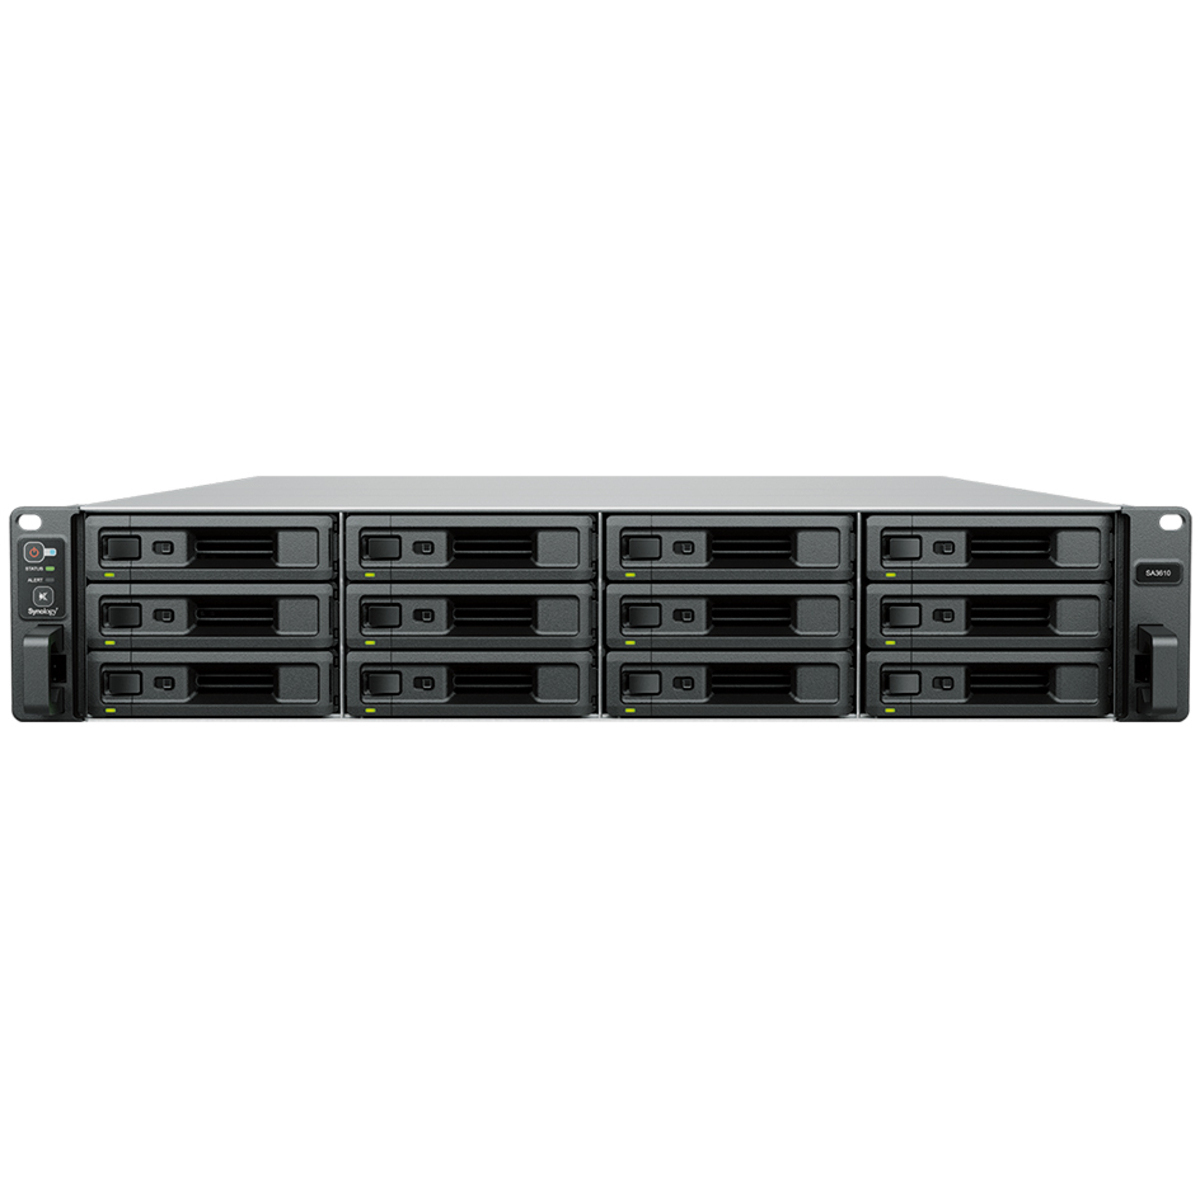 Synology RackStation SA3610 72tb 12-Bay RackMount Large Business / Enterprise NAS - Network Attached Storage Device 9x8tb Seagate IronWolf Pro ST8000NT001 3.5 7200rpm SATA 6Gb/s HDD NAS Class Drives Installed - Burn-In Tested - ON SALE RackStation SA3610